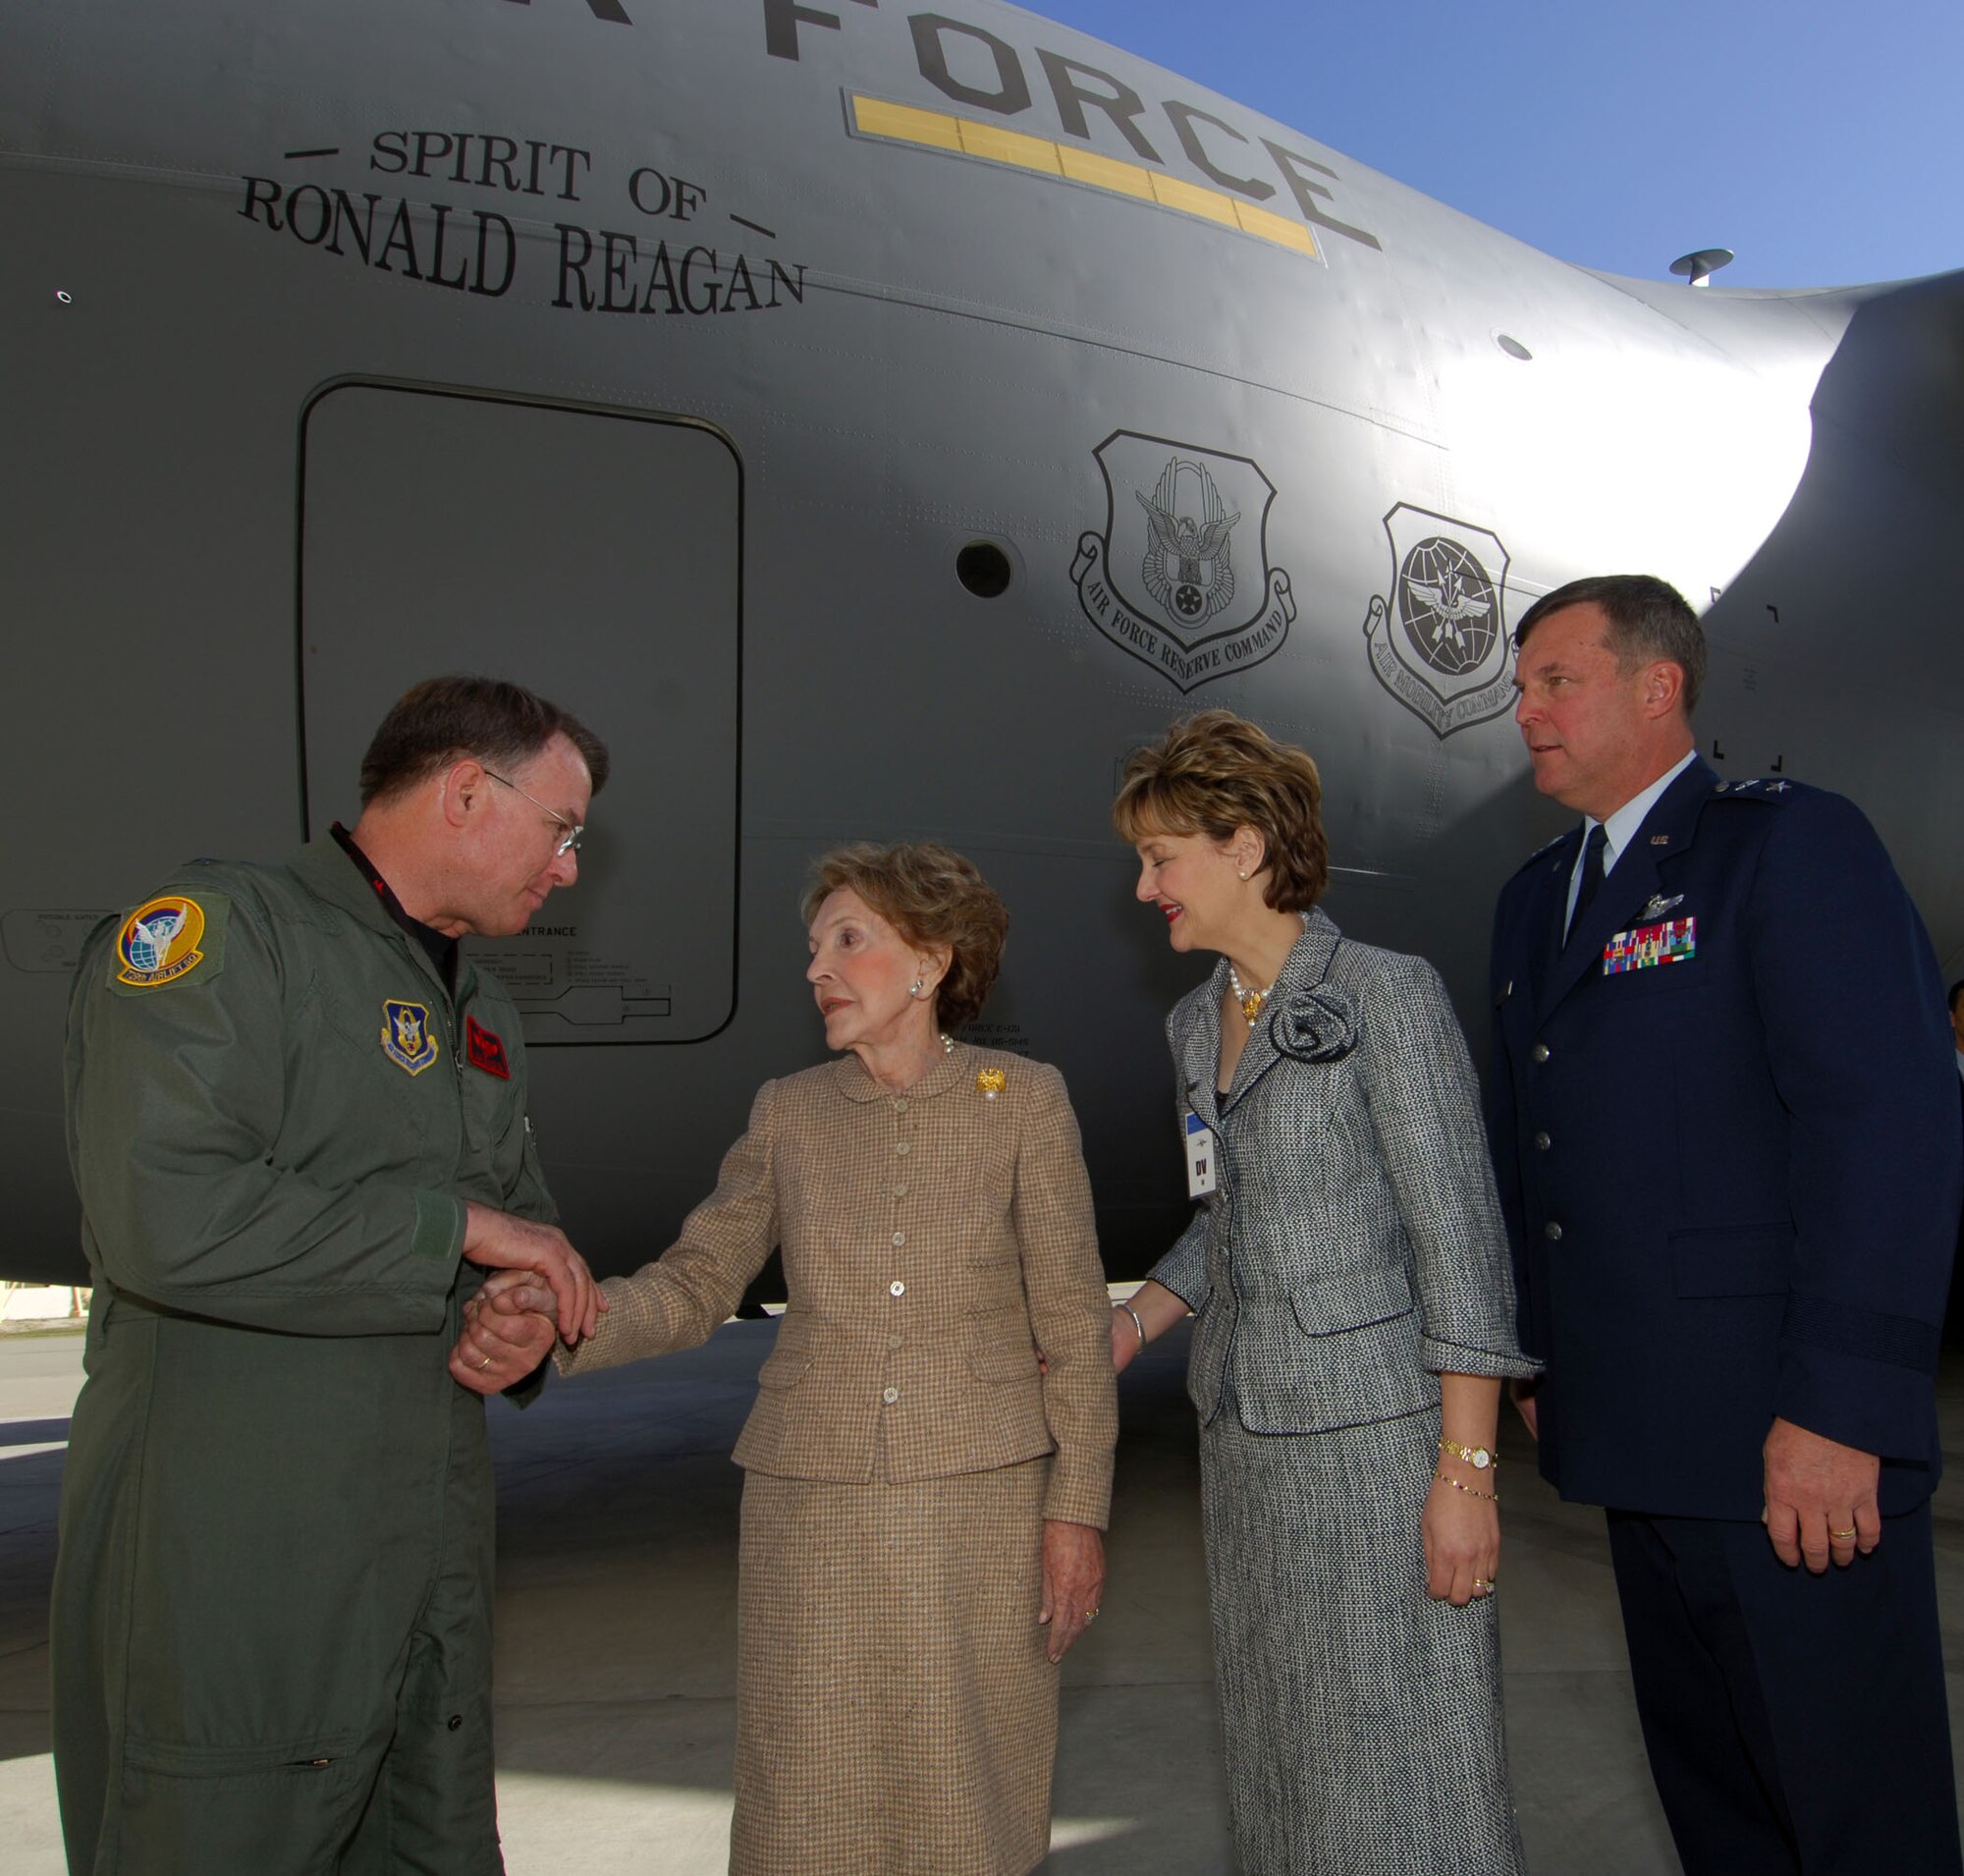 MARCH AIR RESERVE BASE, Calif. (AFPN) -- Lt. Gen. John Bradley shakes Nancy Reagan's hand after landing the C-17 Globemaster III aircraft the Air Force dedicated today in honor of her late husband, President Ronald Reagan. The general's wife, Jan, and 4th Air Force commander Maj. Gen. Robert E. Duignan also attended the dedication of The Spirit of Ronald Reagan. General Bradley is chief of the Air Force Reserve and commander of Air Force Reserve Command. (Courtesy photo)